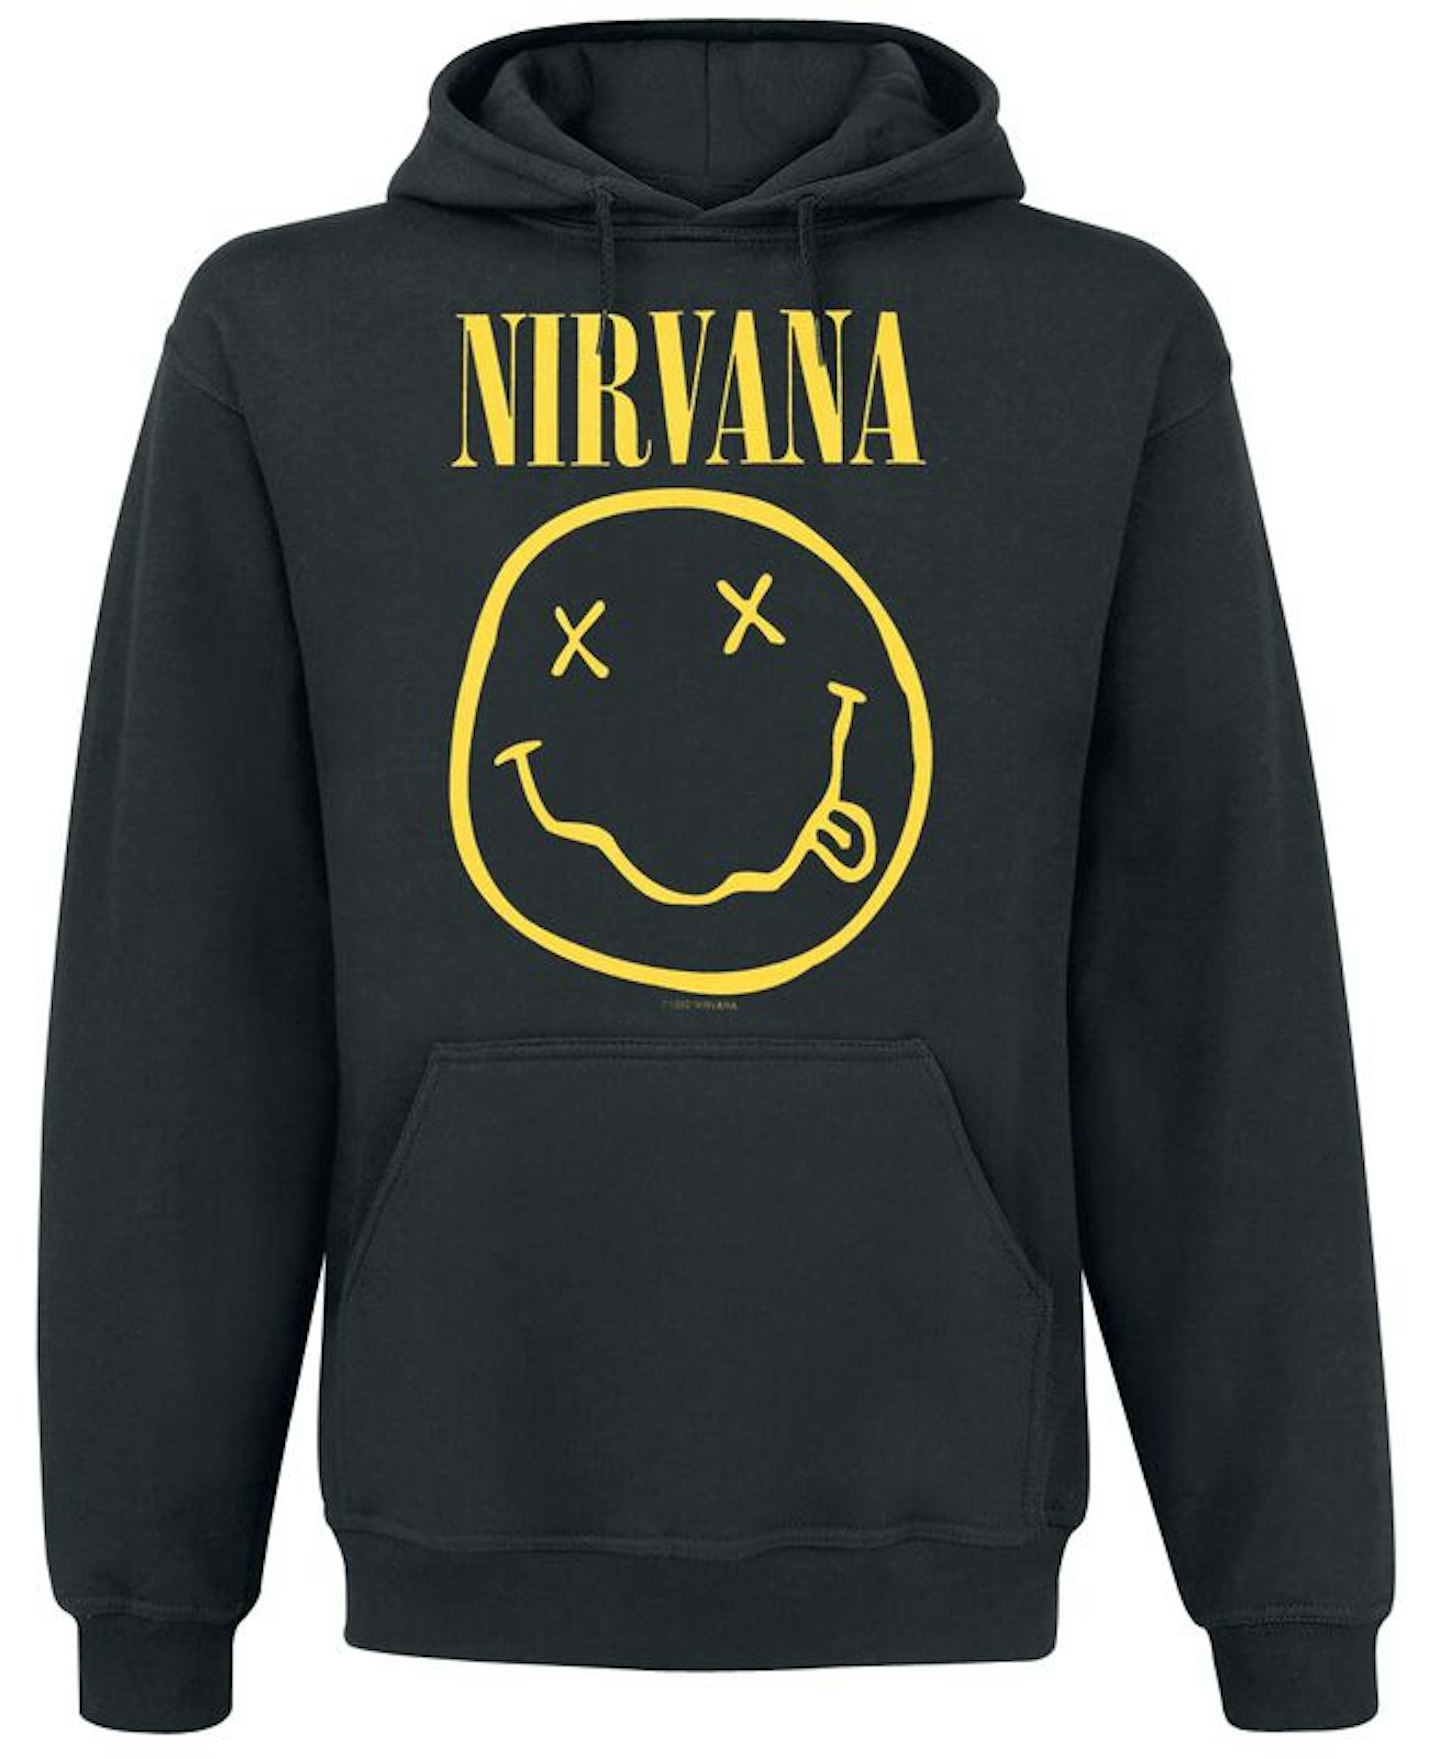 Smiley Hooded sweater